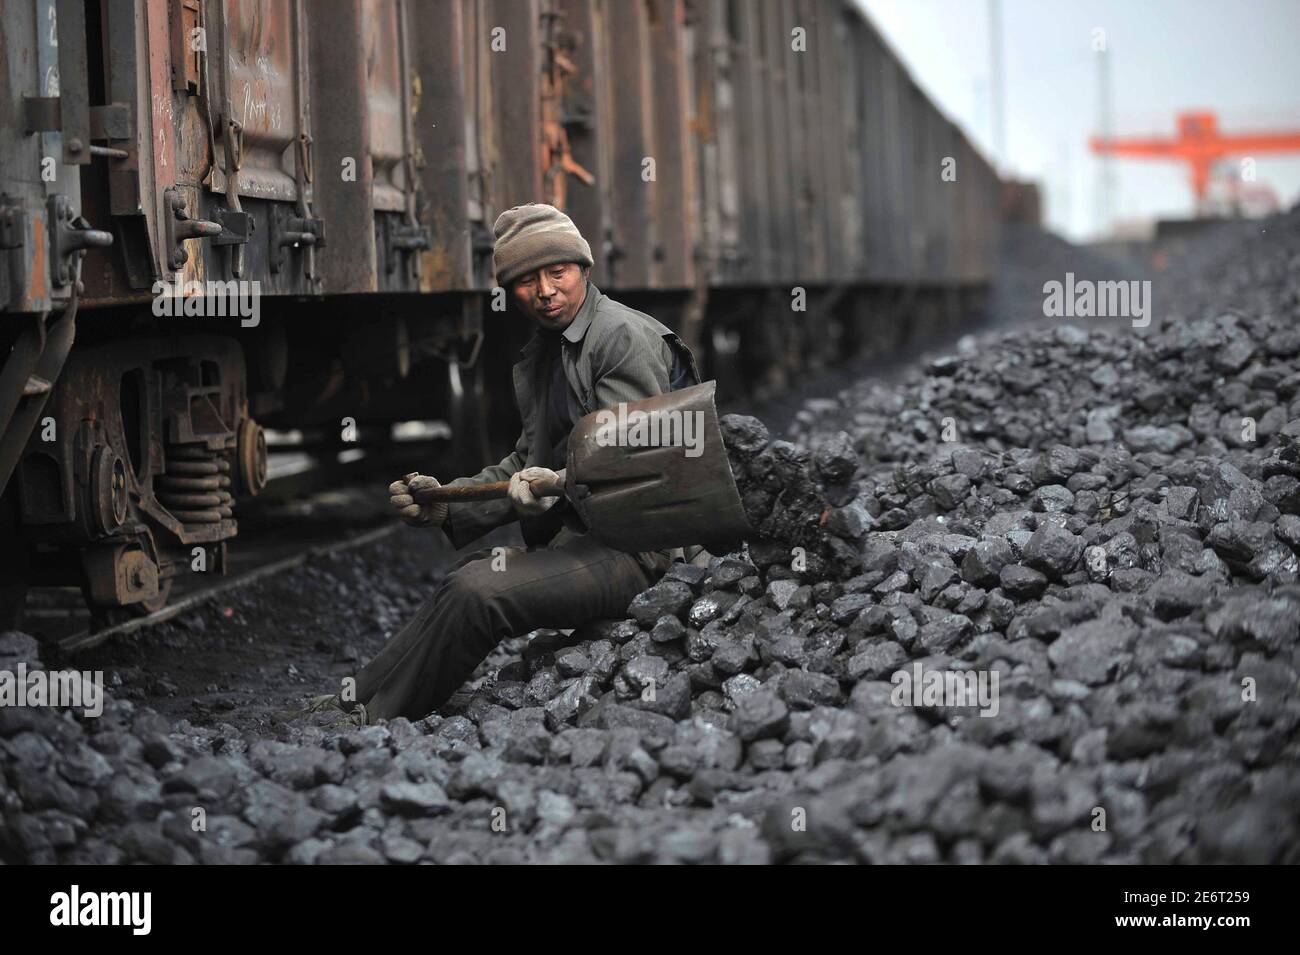 A worker unloads coal at a storage site along a railway station in Shenyang, Liaoning province April 13, 2010. China's coal imports this year will remain at similar levels to last year, when they rose to a record high on strong Chinese demand and weak international prices, Fang Junshi, director-general of the Department of Coal Industry at China's National Energy Administration, said on Monday. REUTERS/Sheng Li (CHINA - Tags: ENERGY EMPLOYMENT BUSINESS) Stock Photo